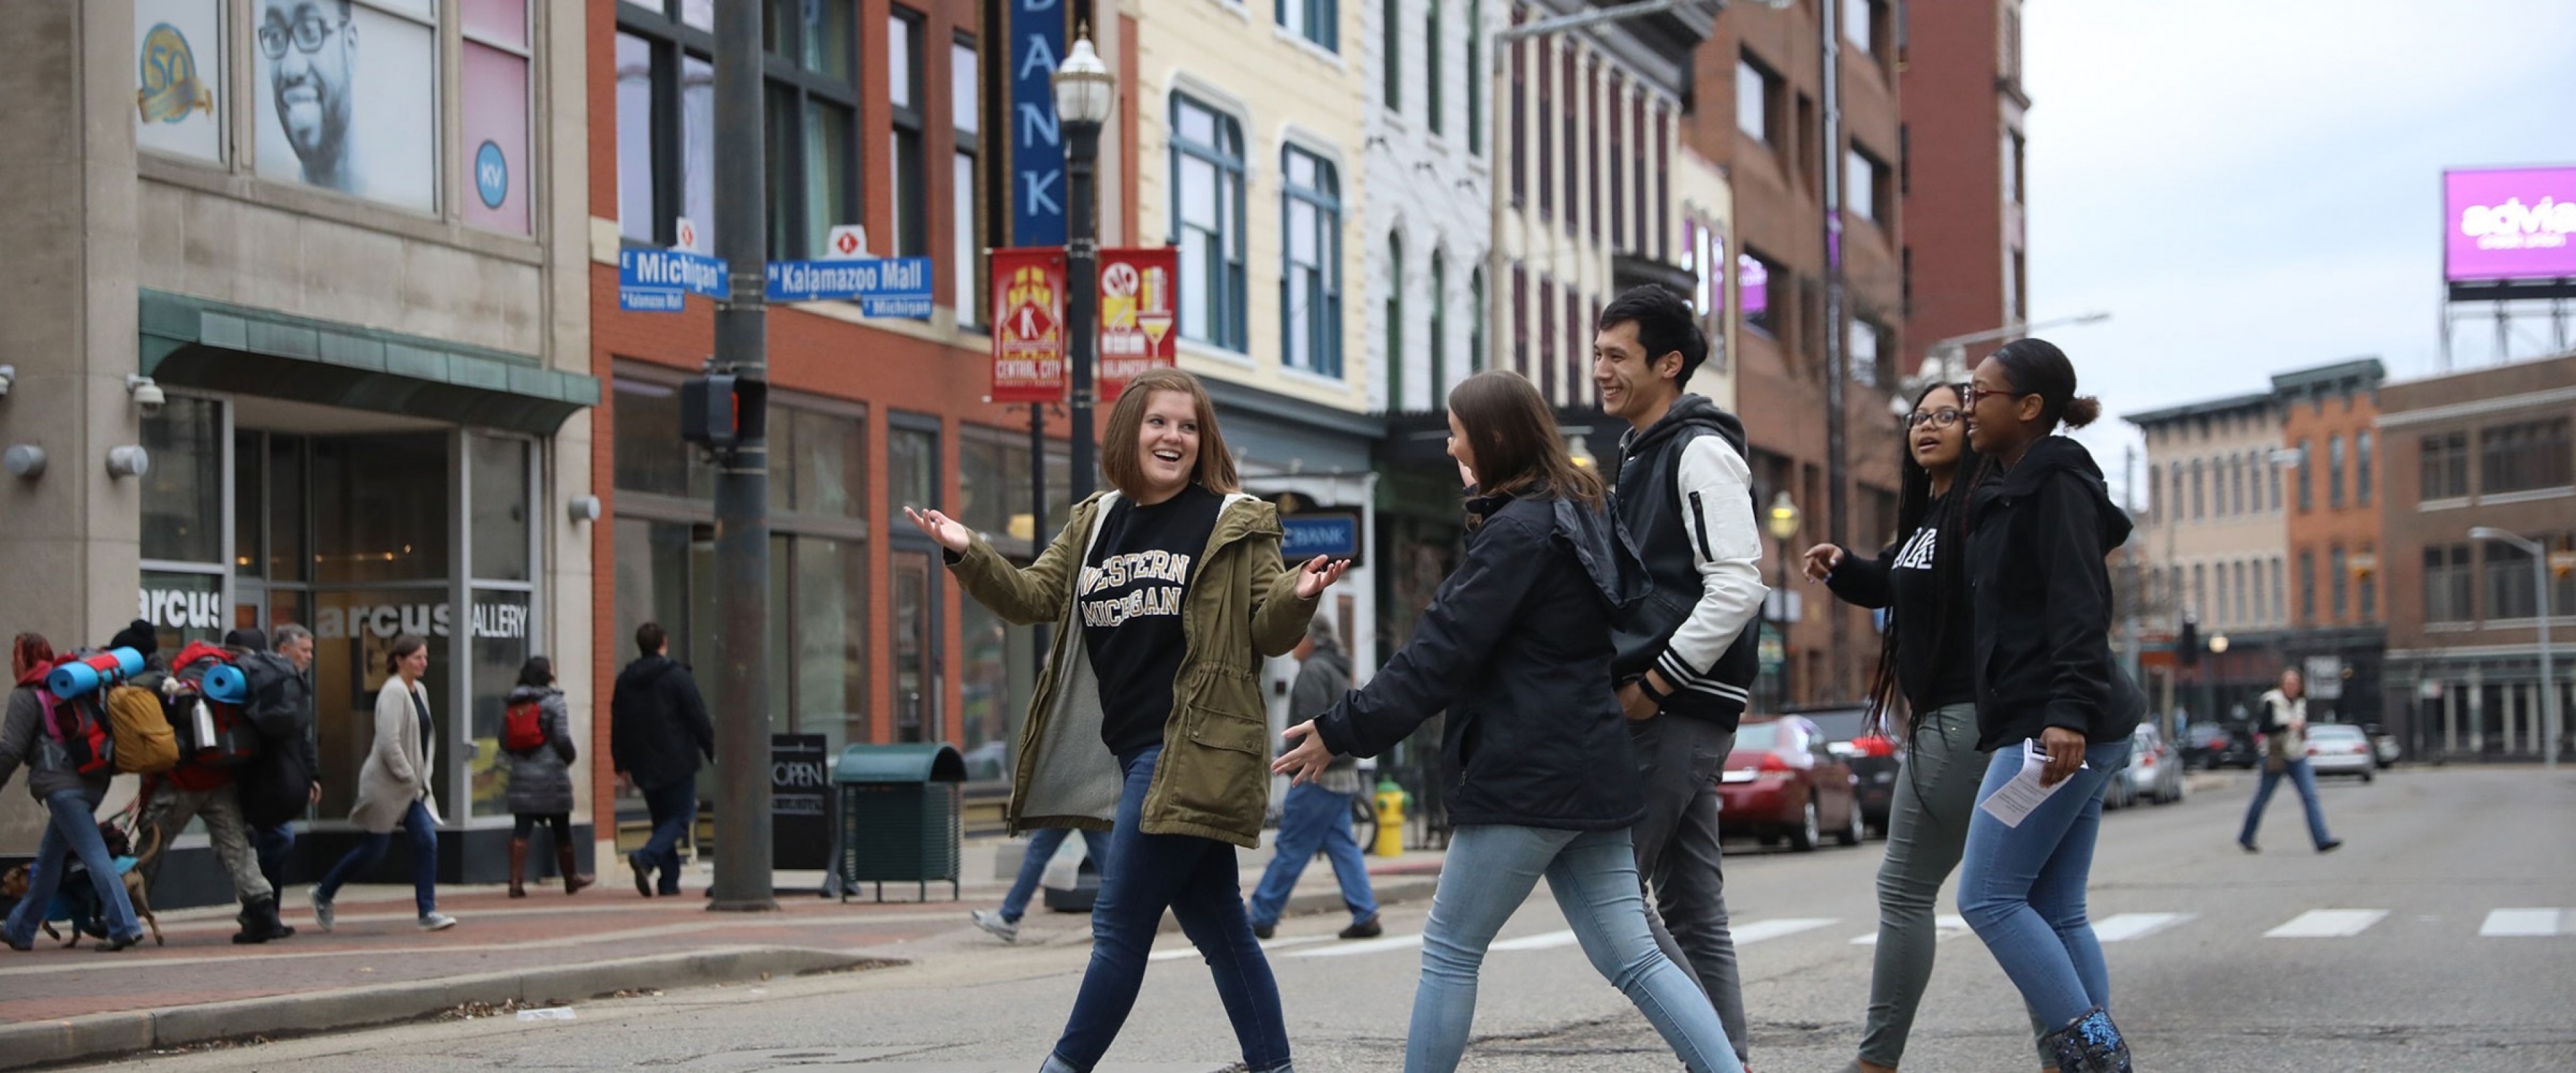 A group of WMU students cross West Michigan Avenue in downtown Kalamazoo